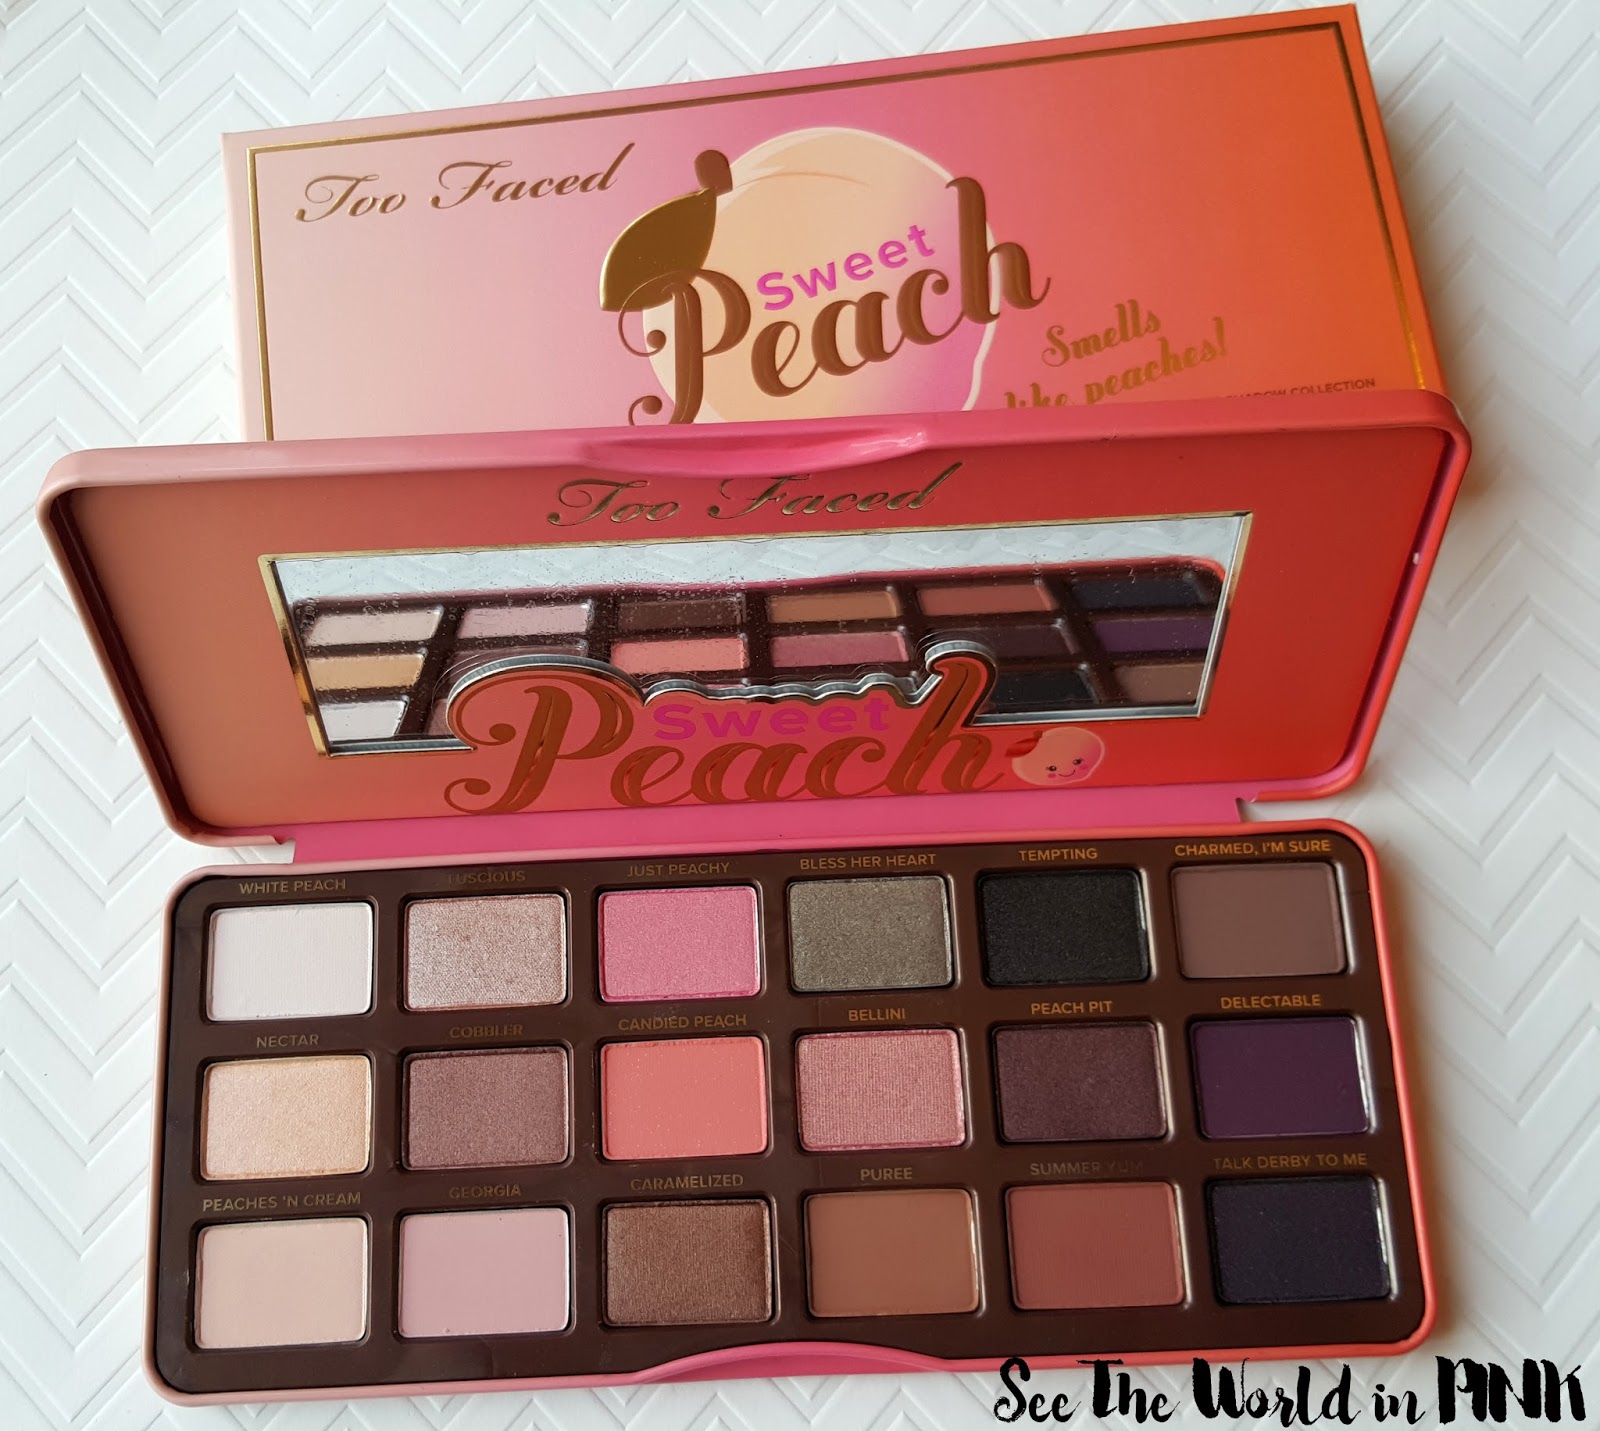 Too Faced Sweet Peach Palette Review, Swatches and Makeup Looks